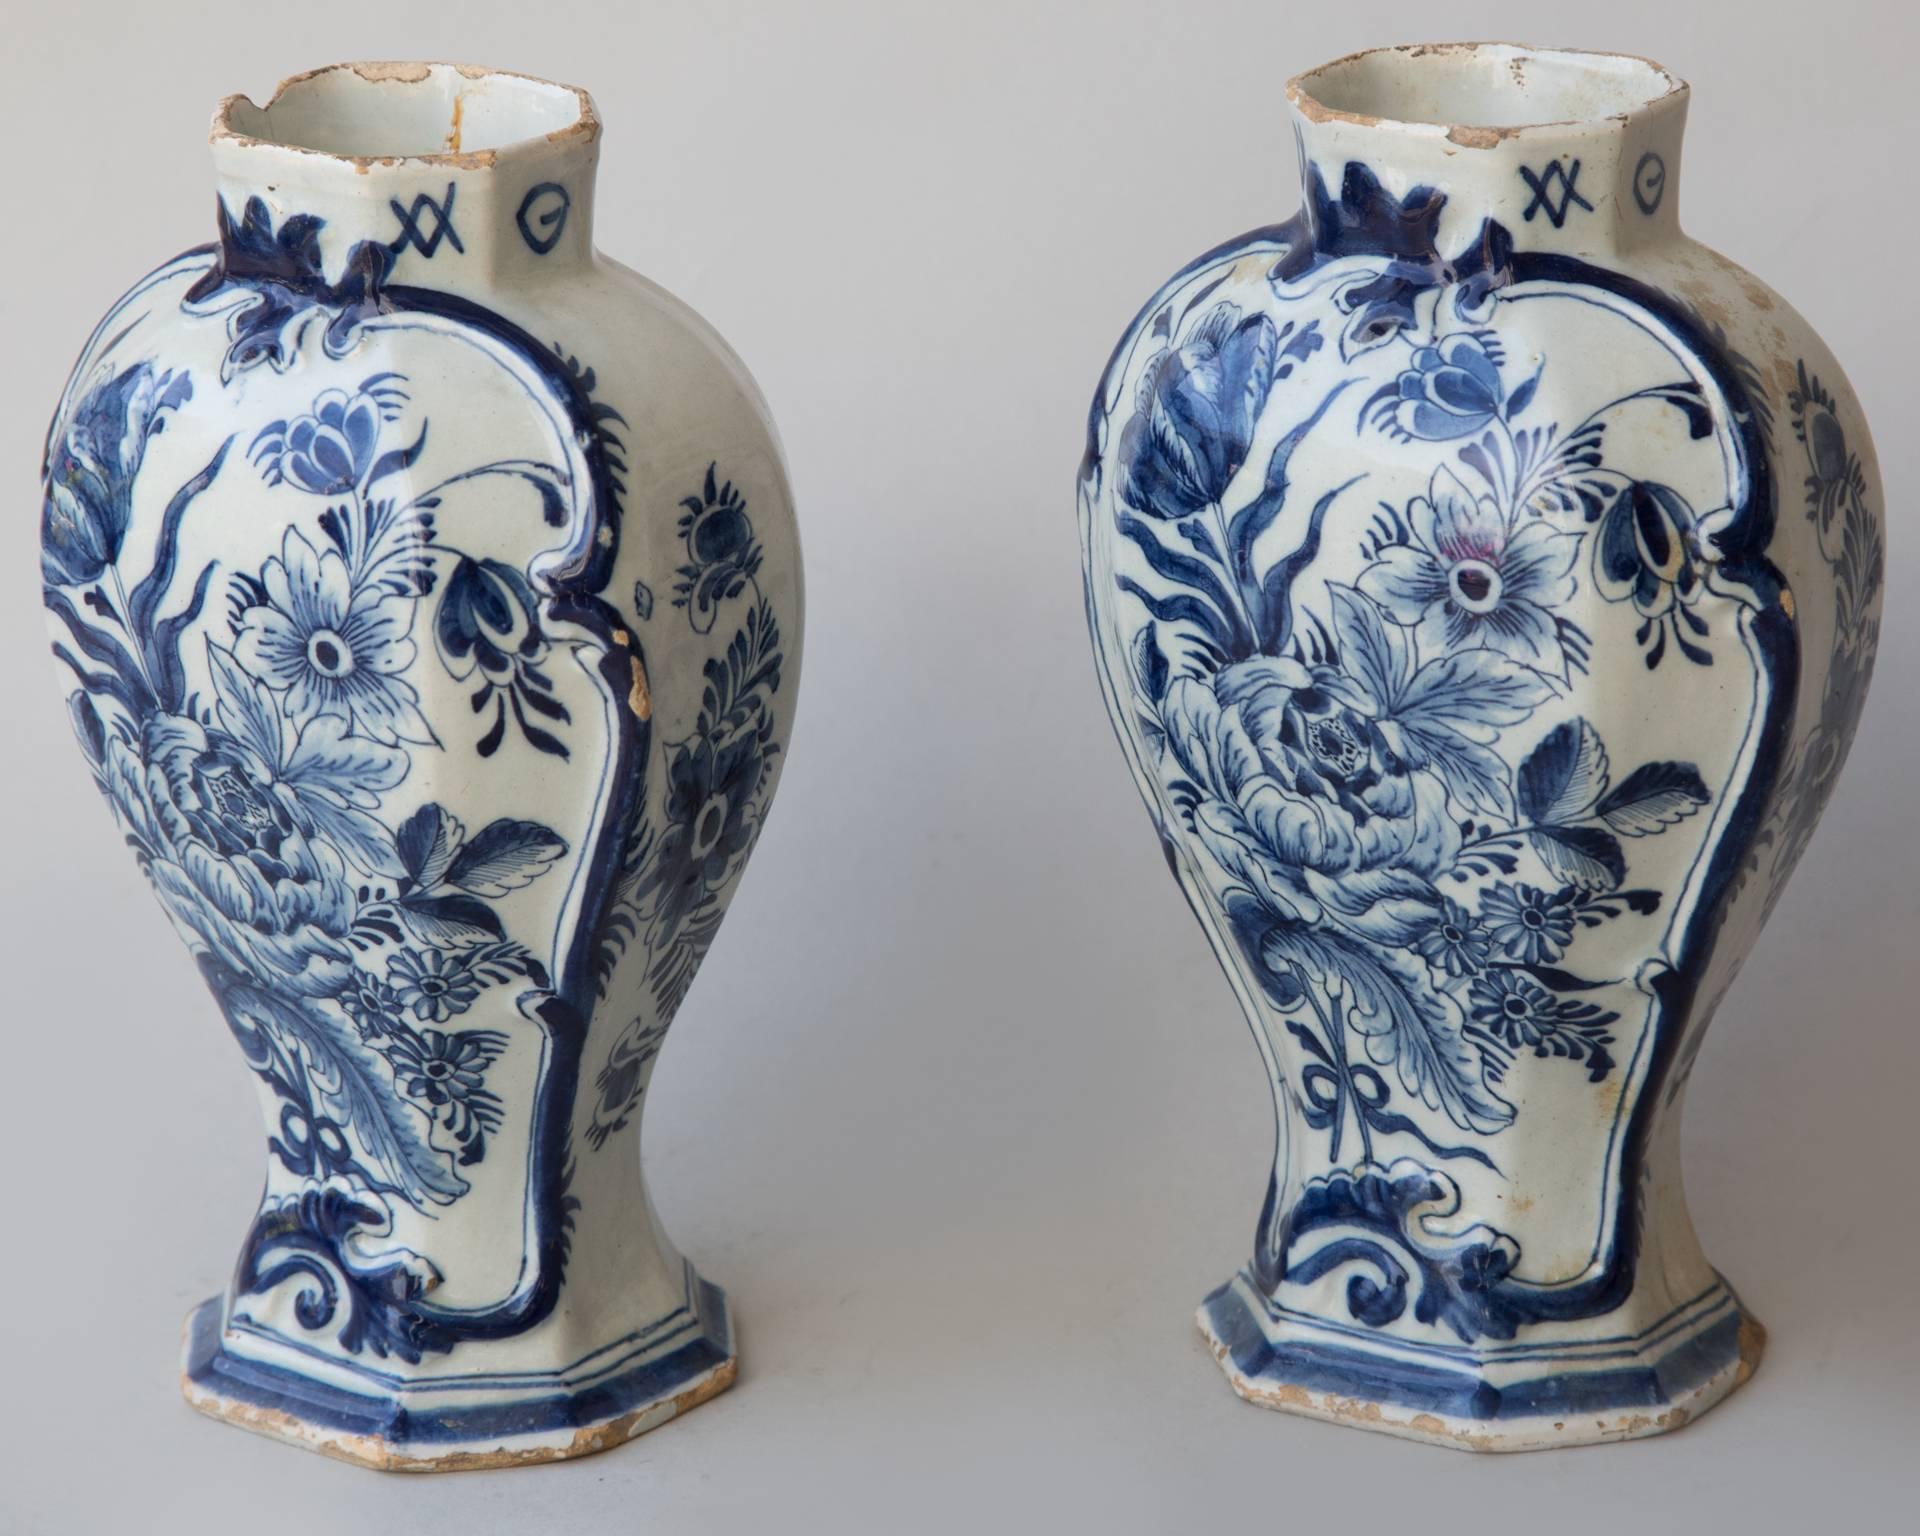 Decorated in blue and white with a Rococo design in relief, with a matching posey of flowers 
to include roses and tulips depicted on each. Stamped by the maker 'PB' on the base. 
The Netherlands, mid-18th century.